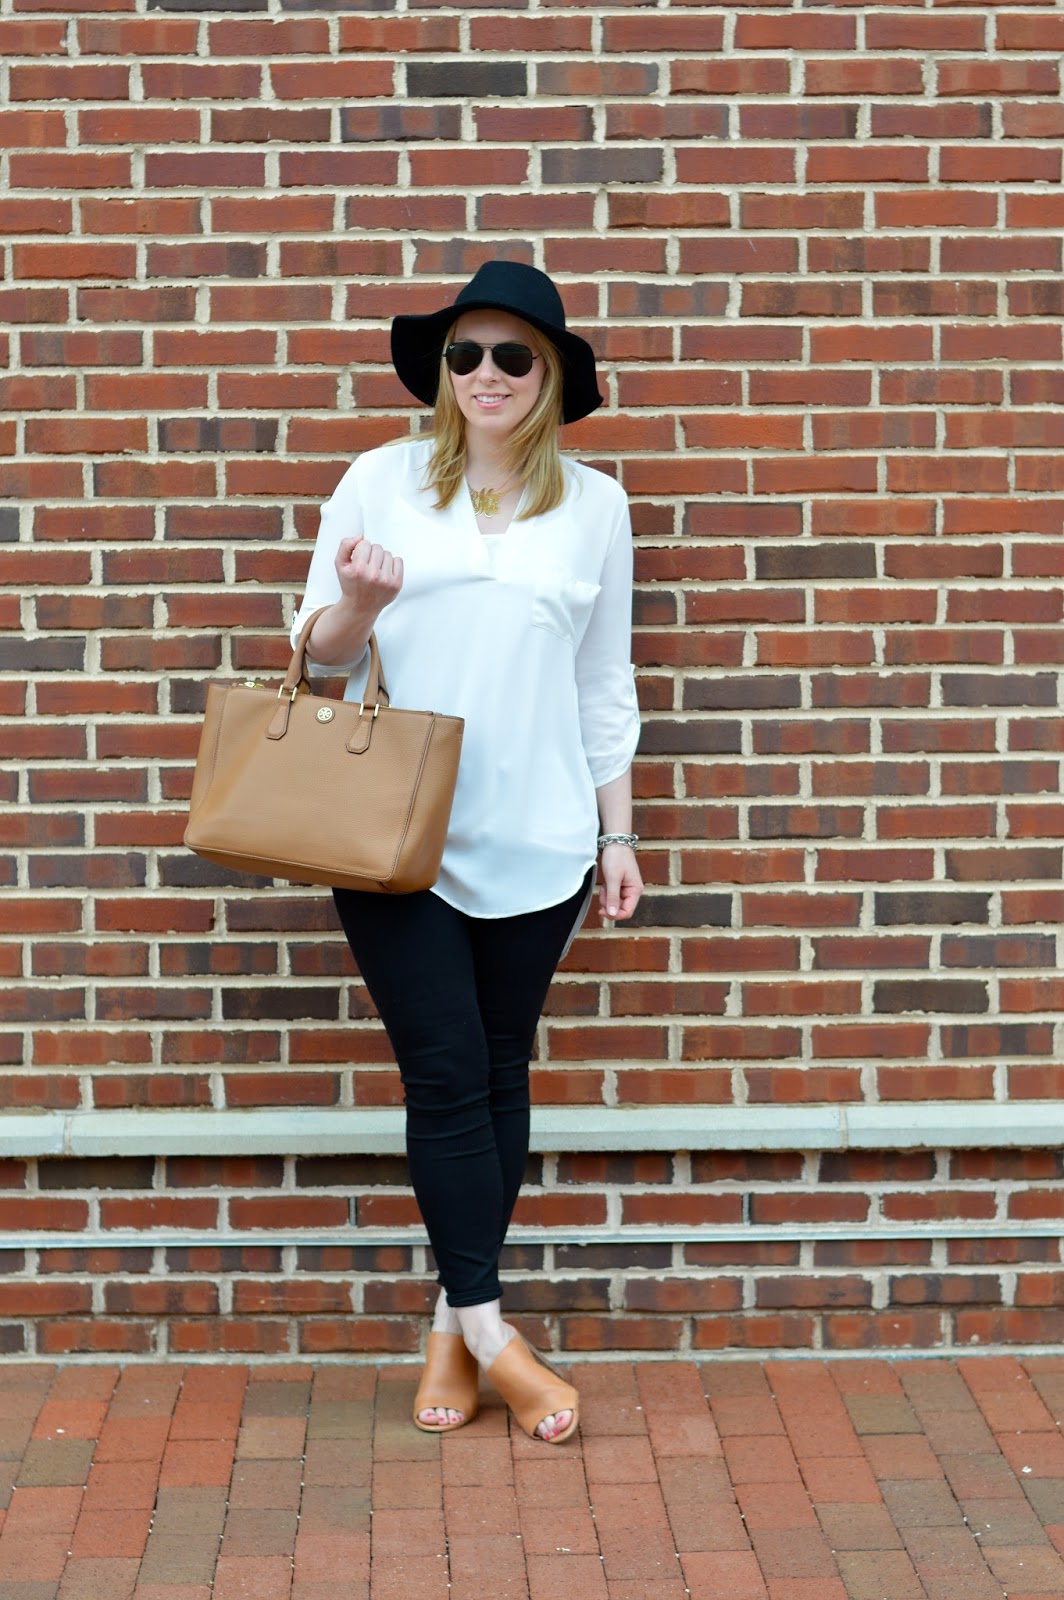 A casual black and cognac fall outfit